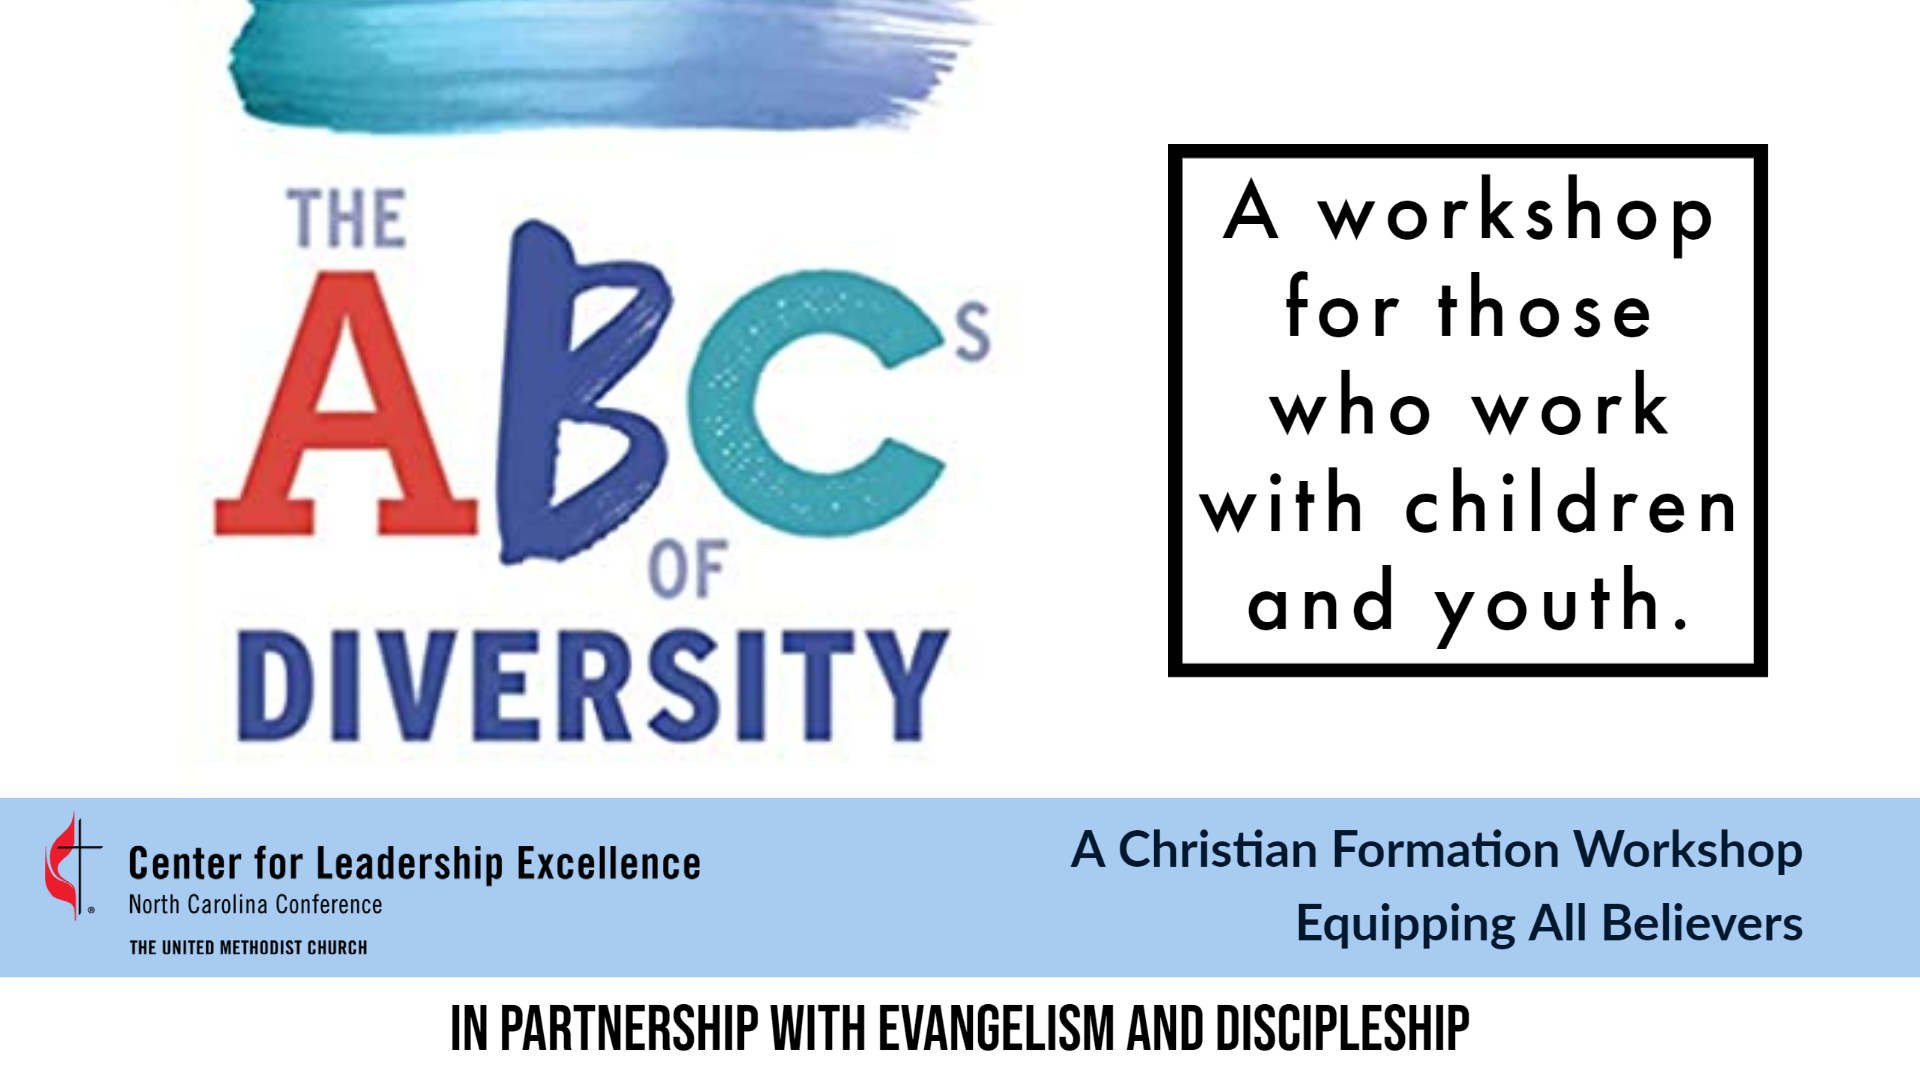 The ABCs of Diversity: Helping Kids (and Ourselves!) Engage Our Differences